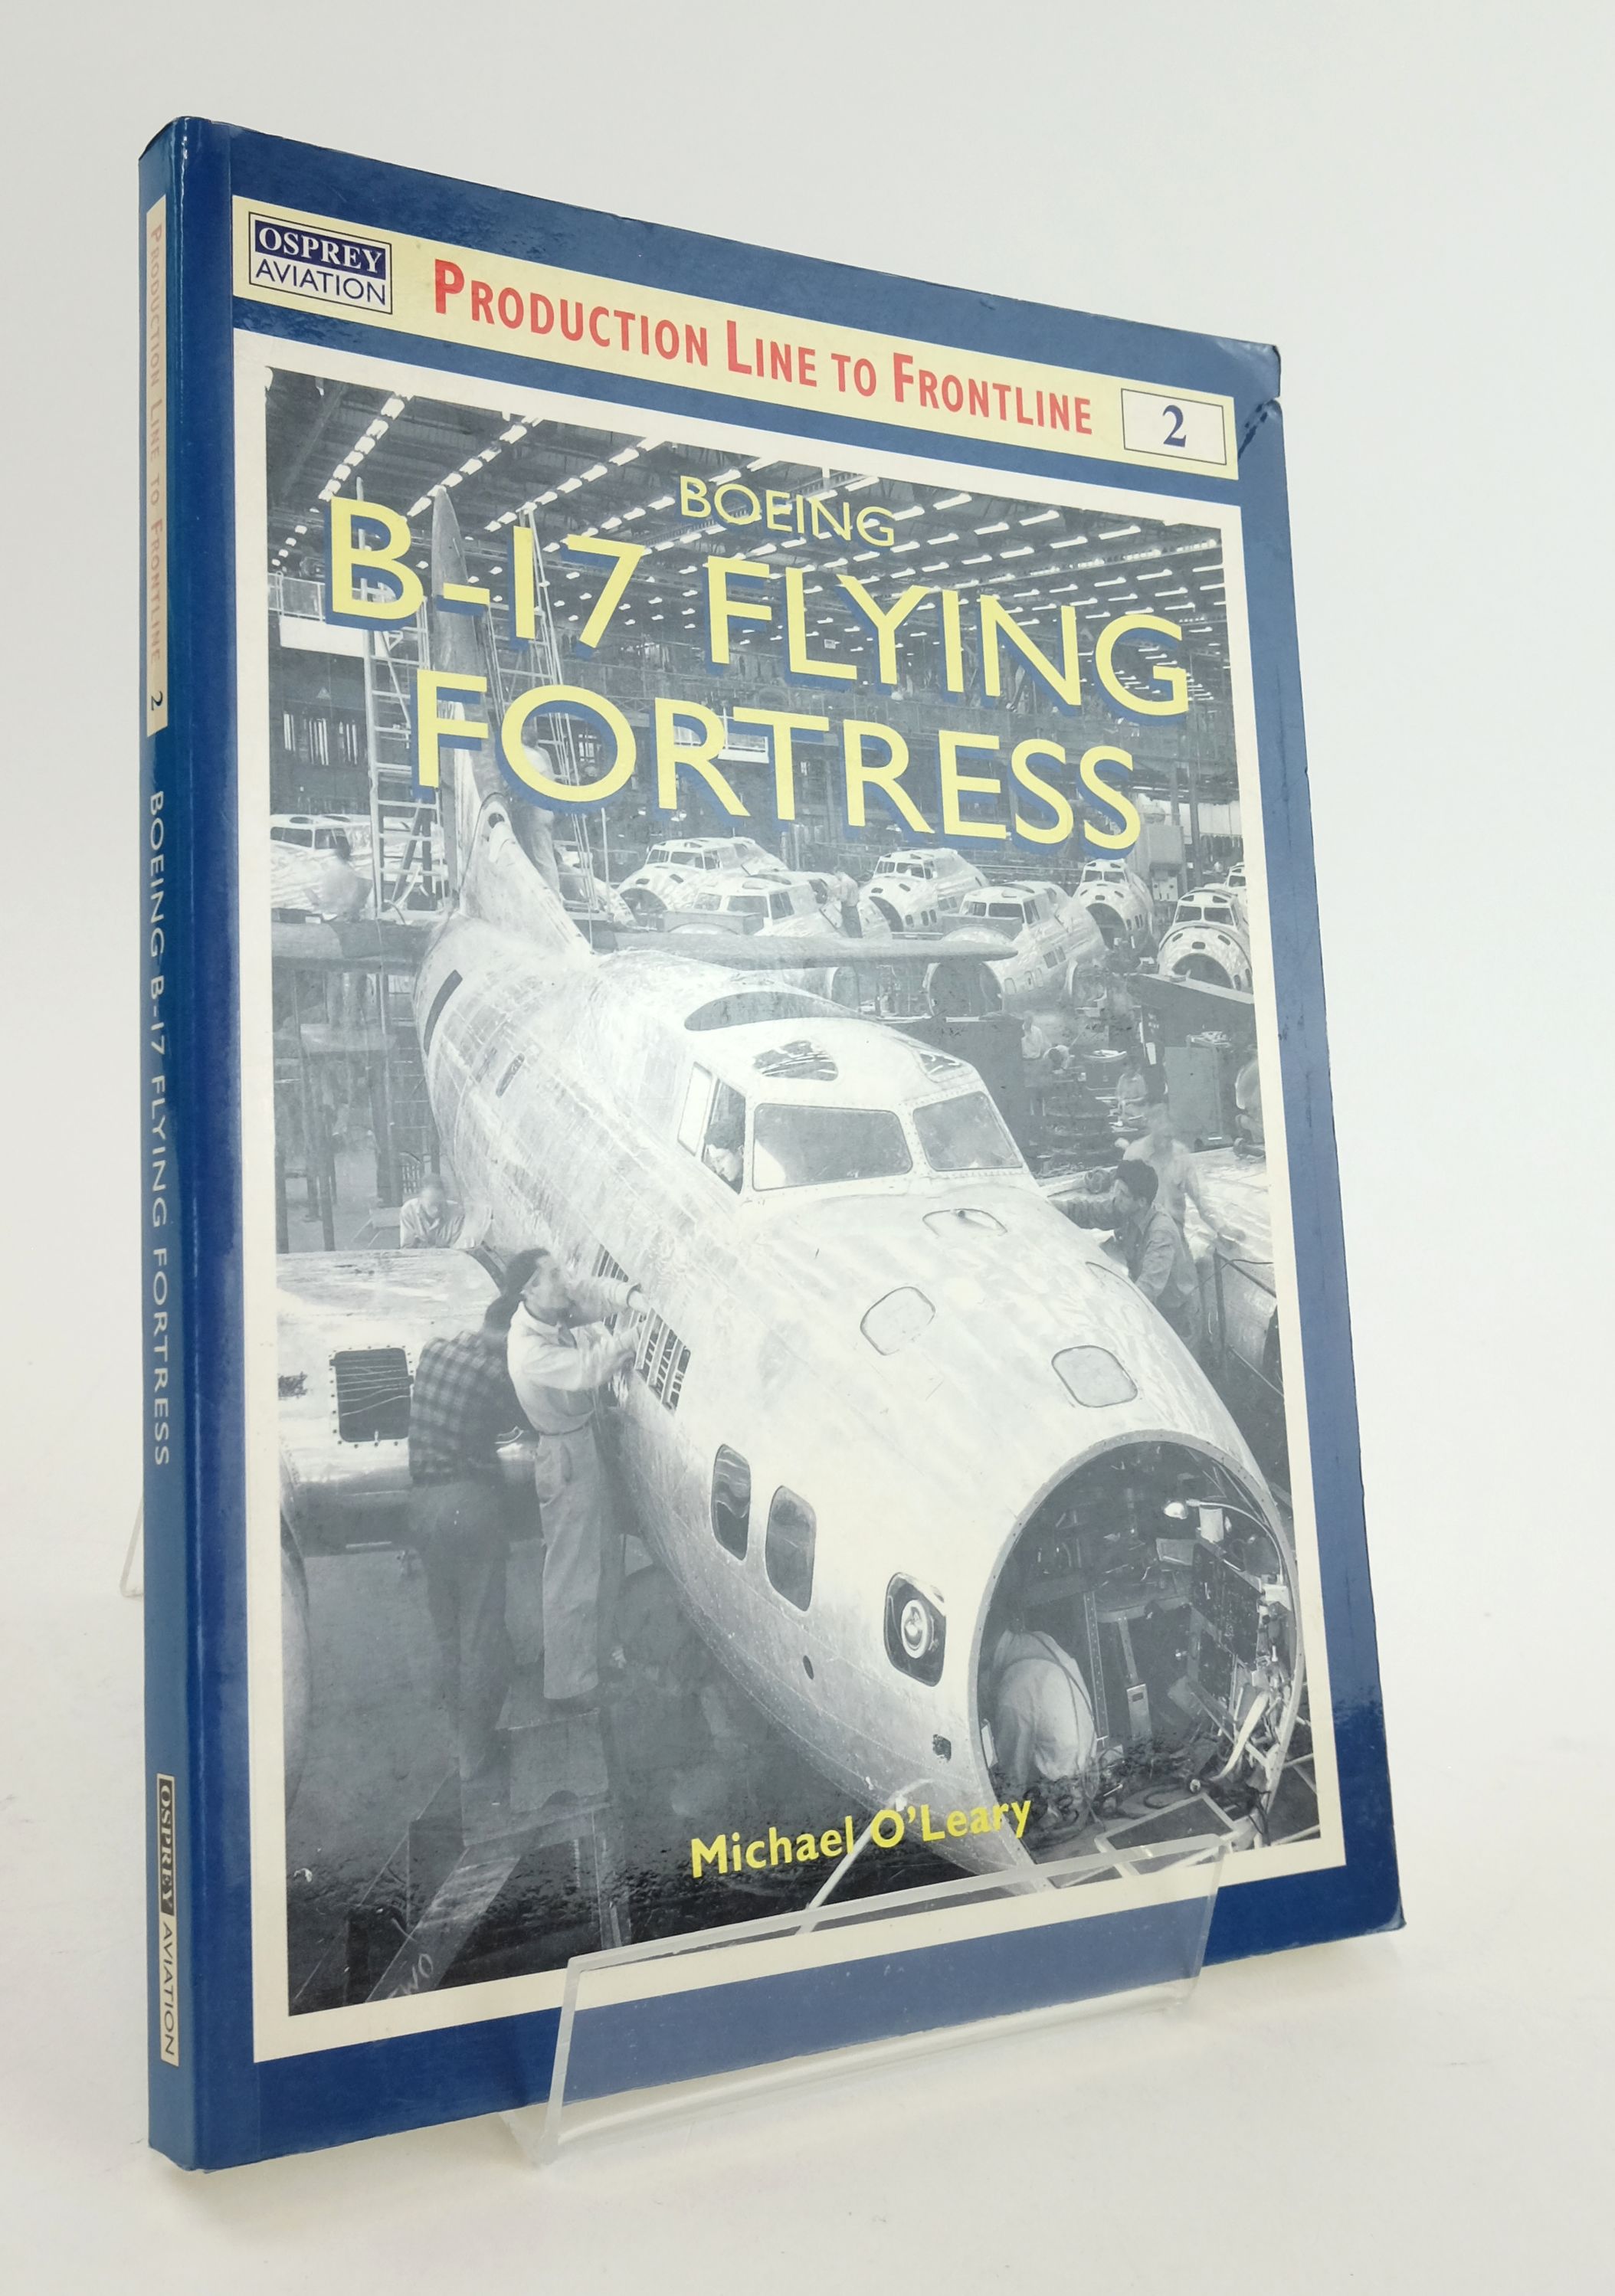 Photo of BOEING B-17 FLYING FORTRESS (PRODUCTION TO FRONTLINE 2) written by O'Leary, Michael published by Osprey Aviation (STOCK CODE: 1824401)  for sale by Stella & Rose's Books